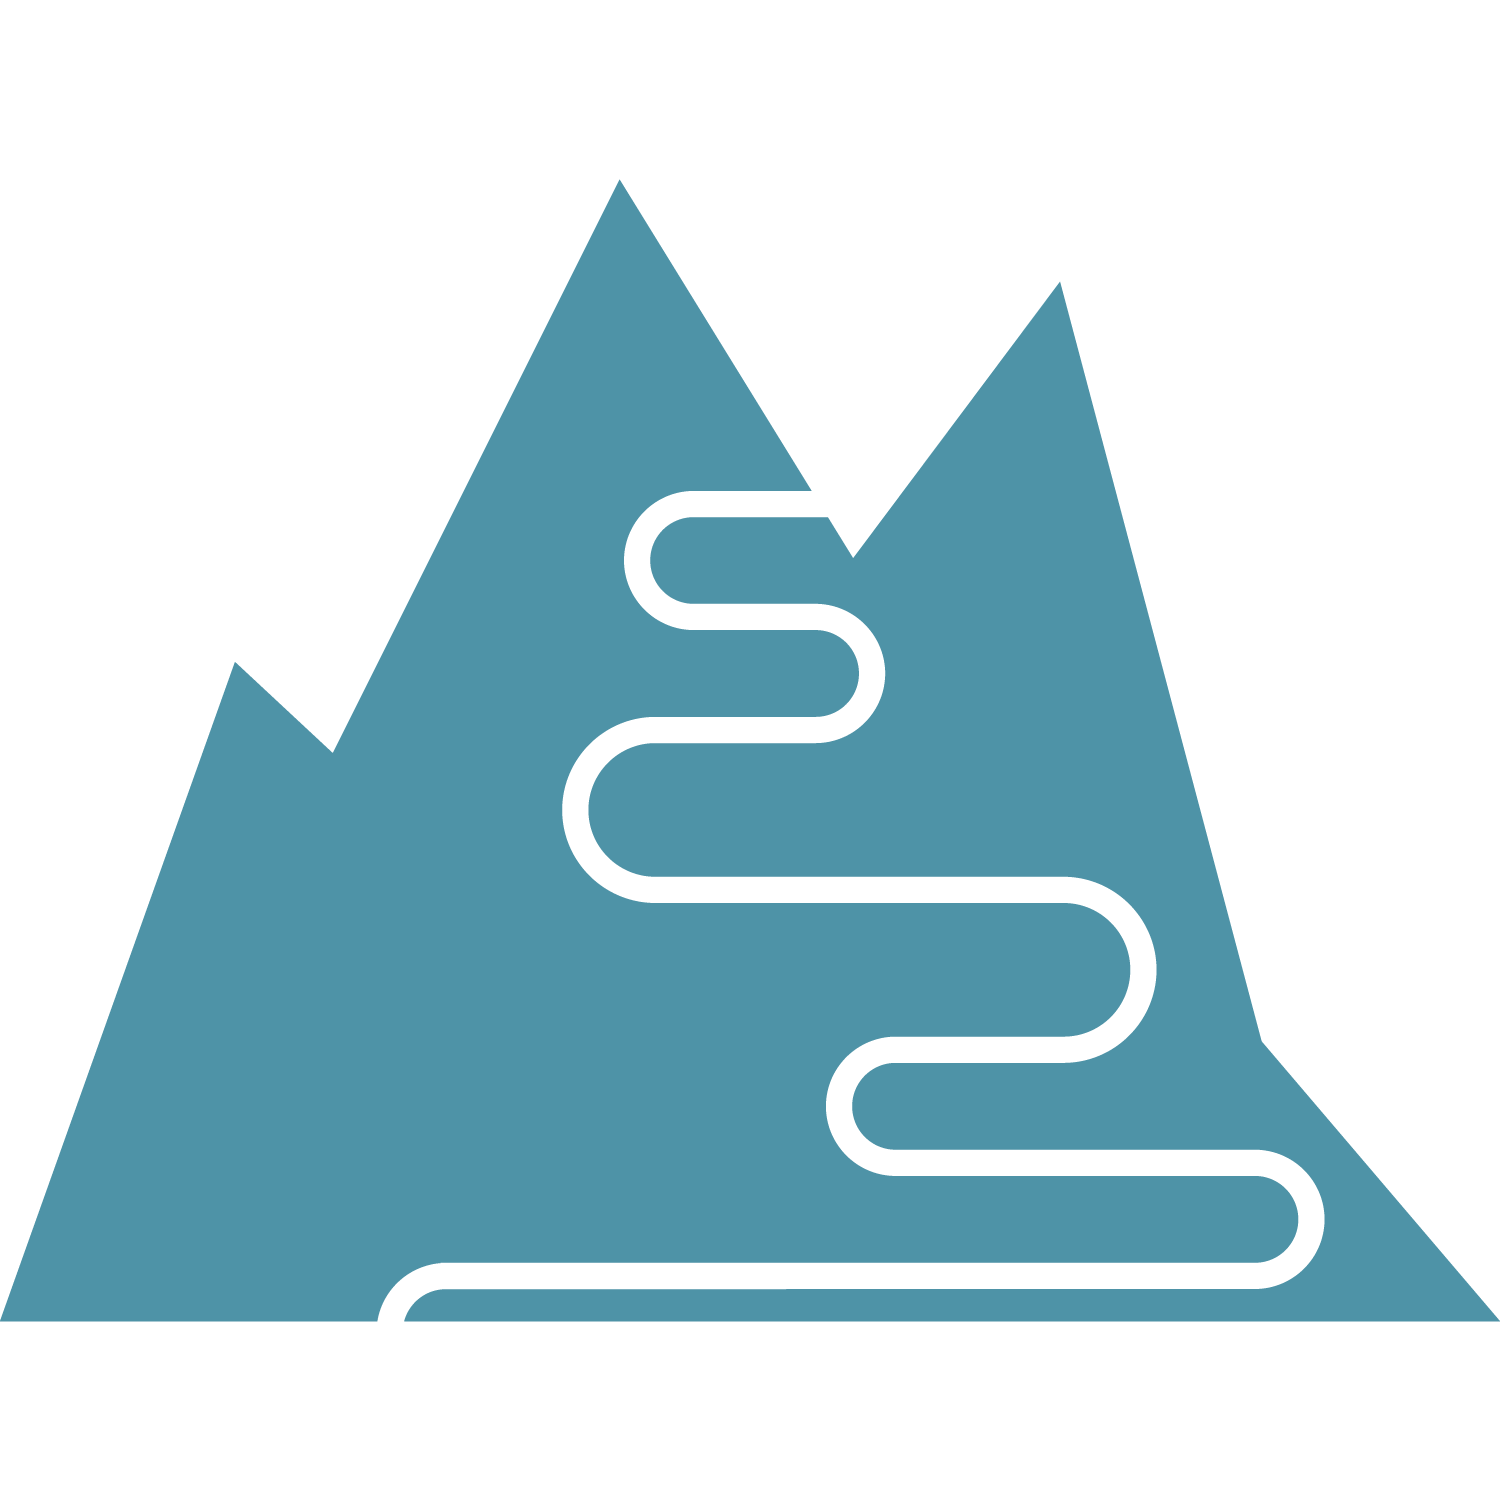 A simple mountain icon with a winding path leading to the top